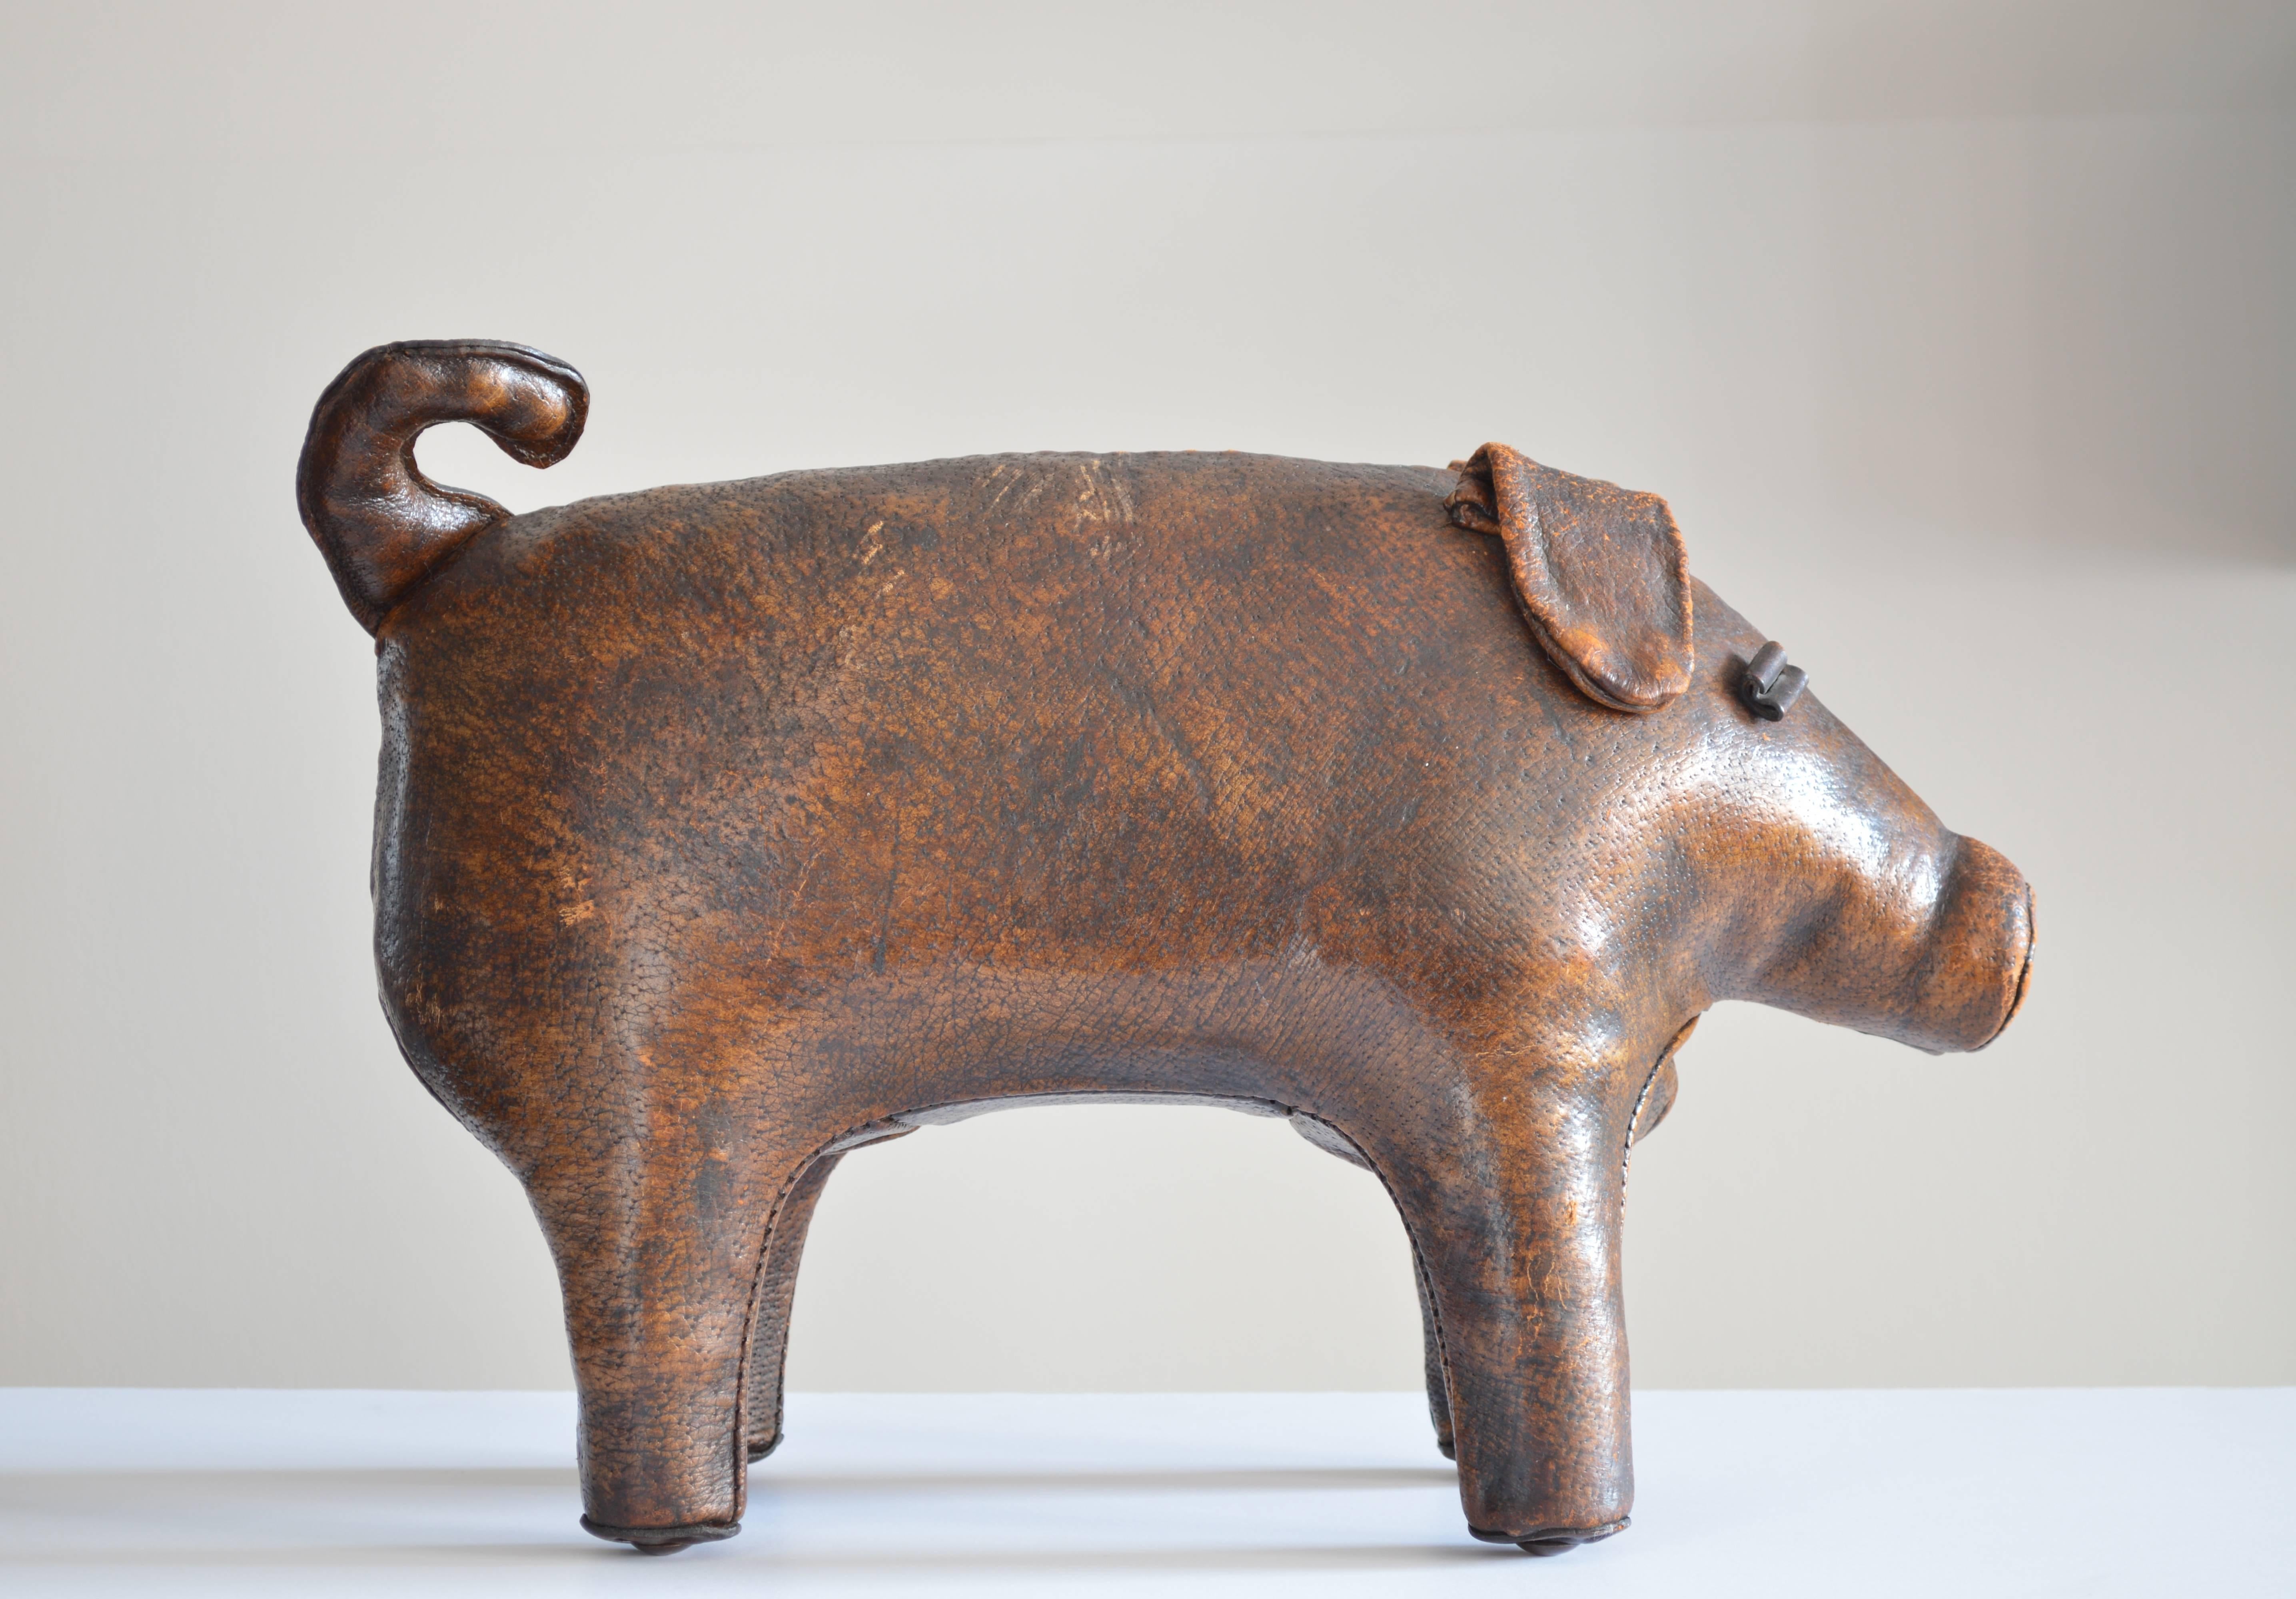 This leather pig makes a great footstool or decorative object. The leather of this piece has a beautiful patina to it that lends a rich finish to the piece.